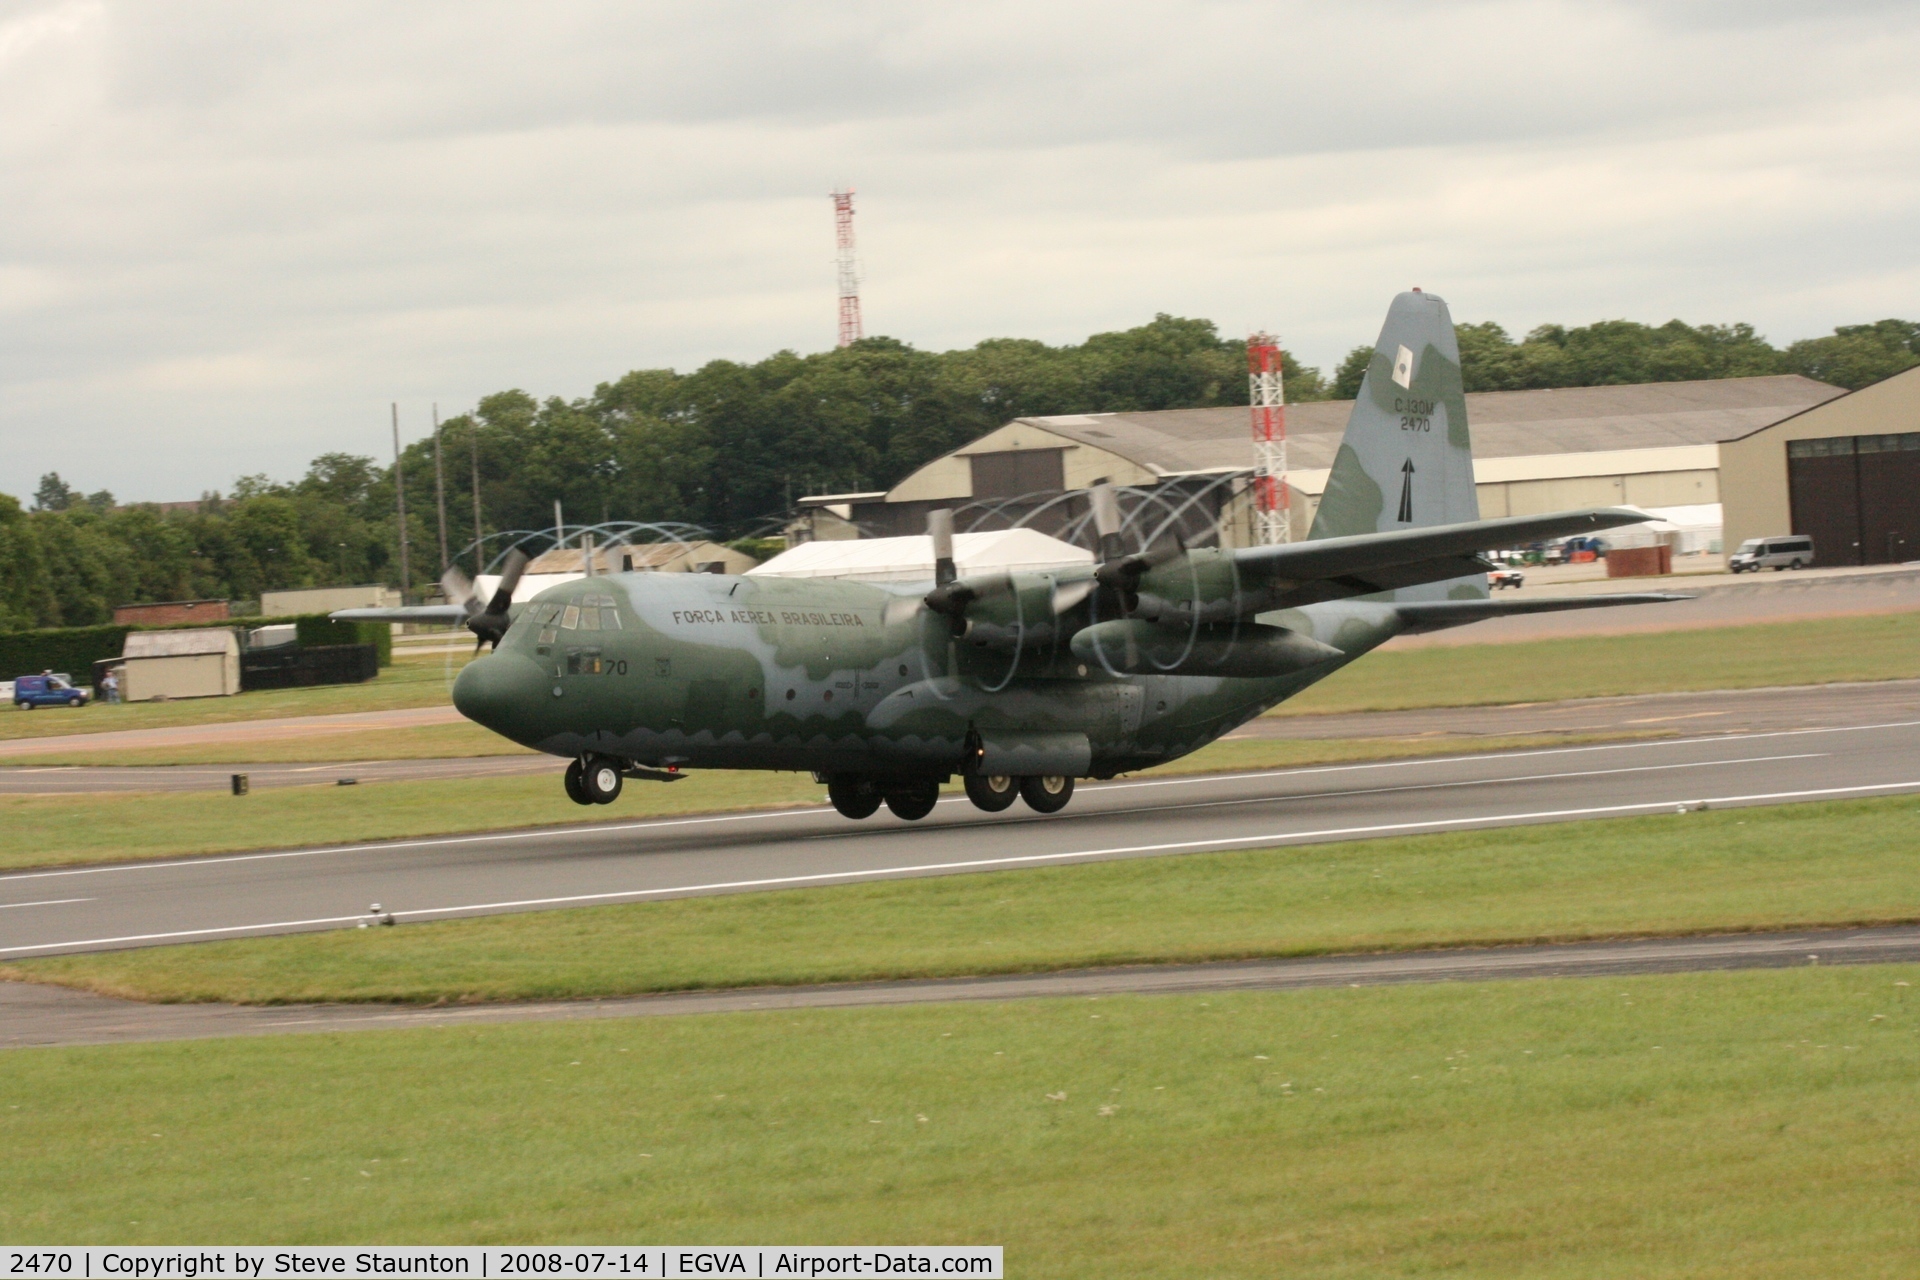 2470, 1971 Lockheed C-130H Hercules C/N 382-4441, Taken at the Royal International Air Tattoo 2008 during arrivals and departures (show days cancelled due to bad weather)